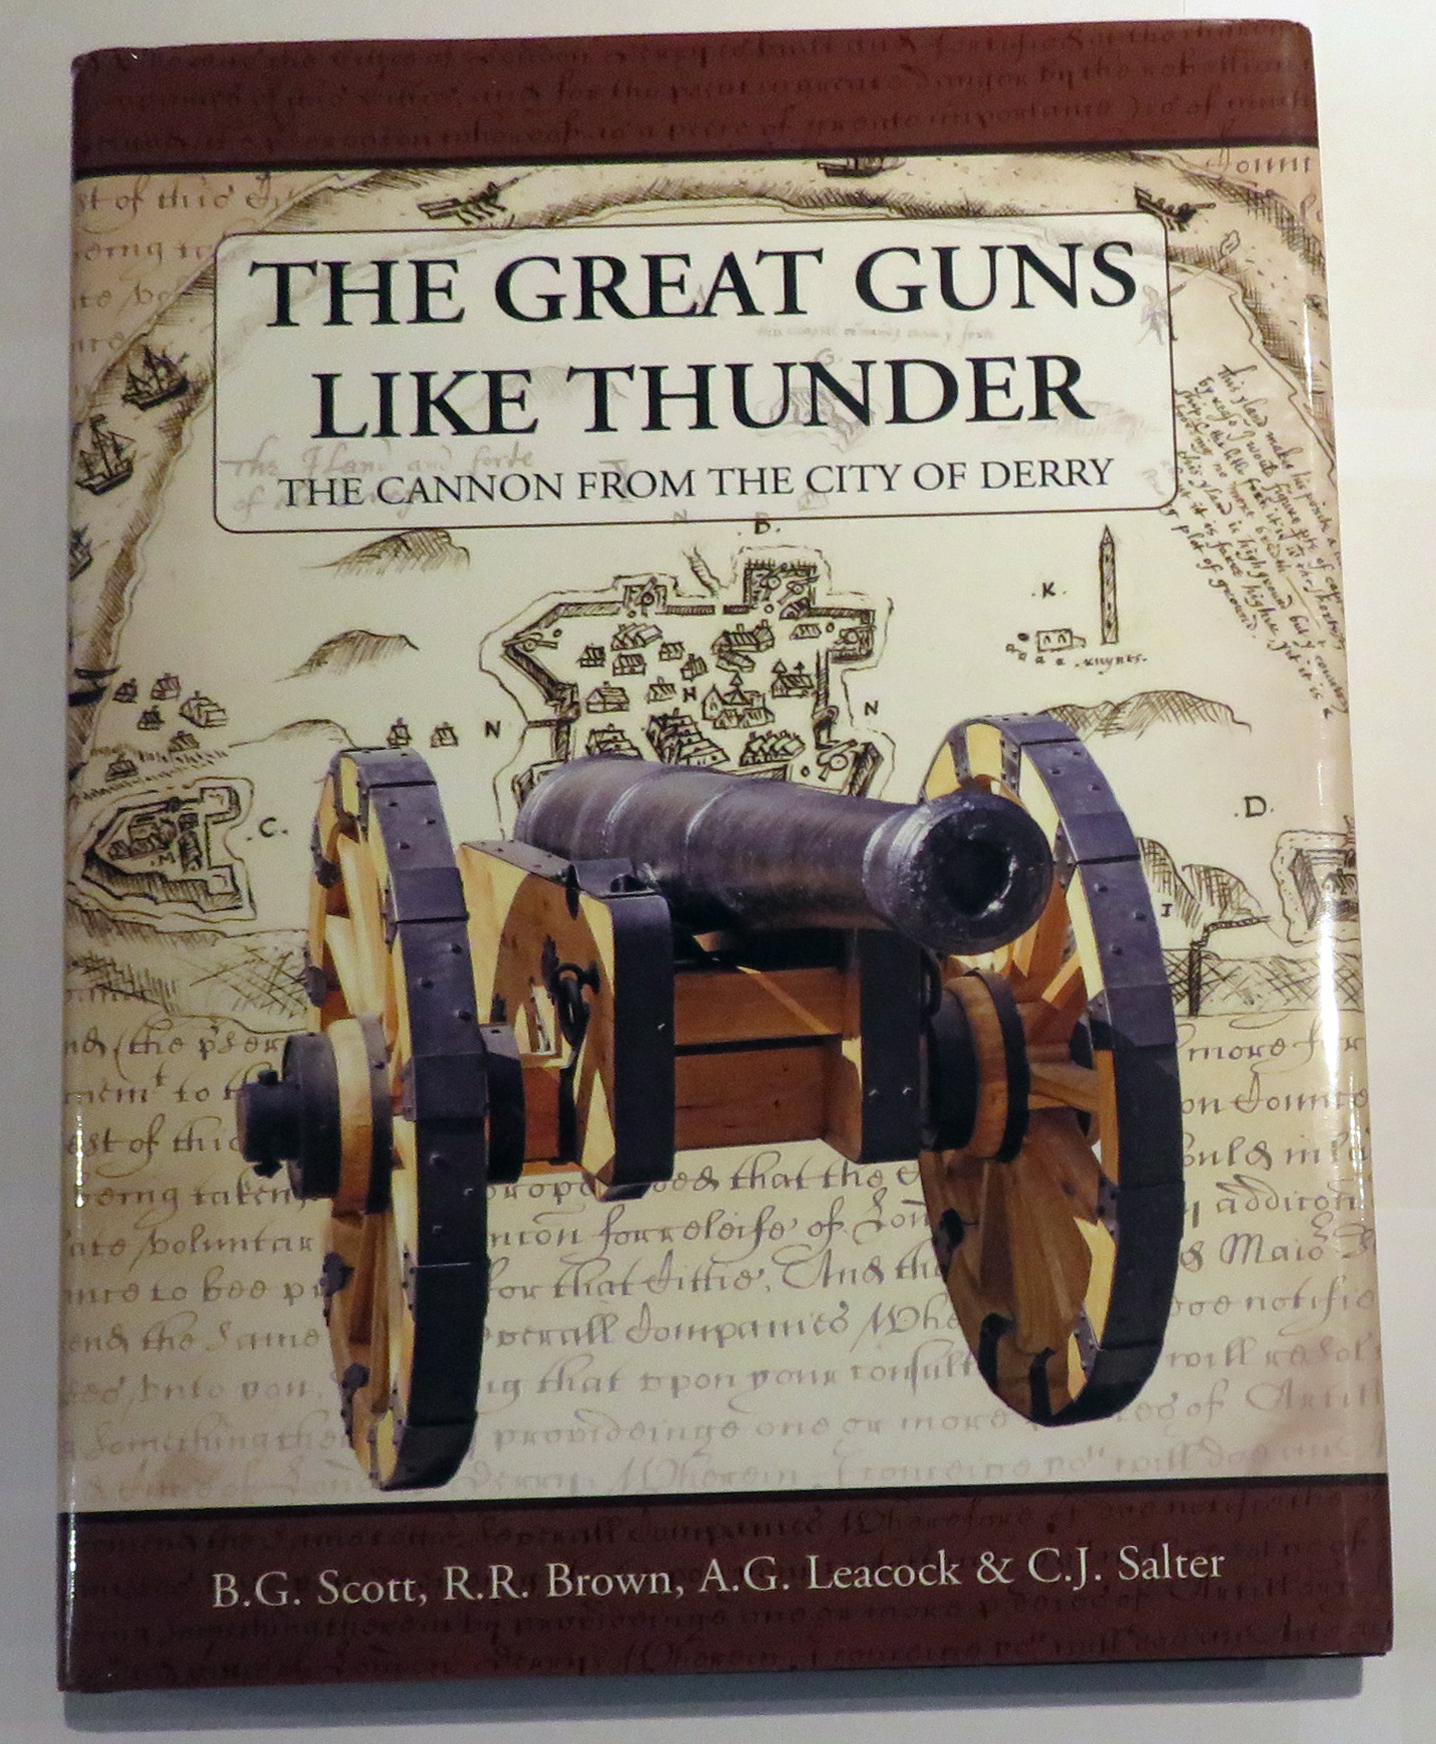 The Great Guns Like Thunder. The Canon From The City of Derry